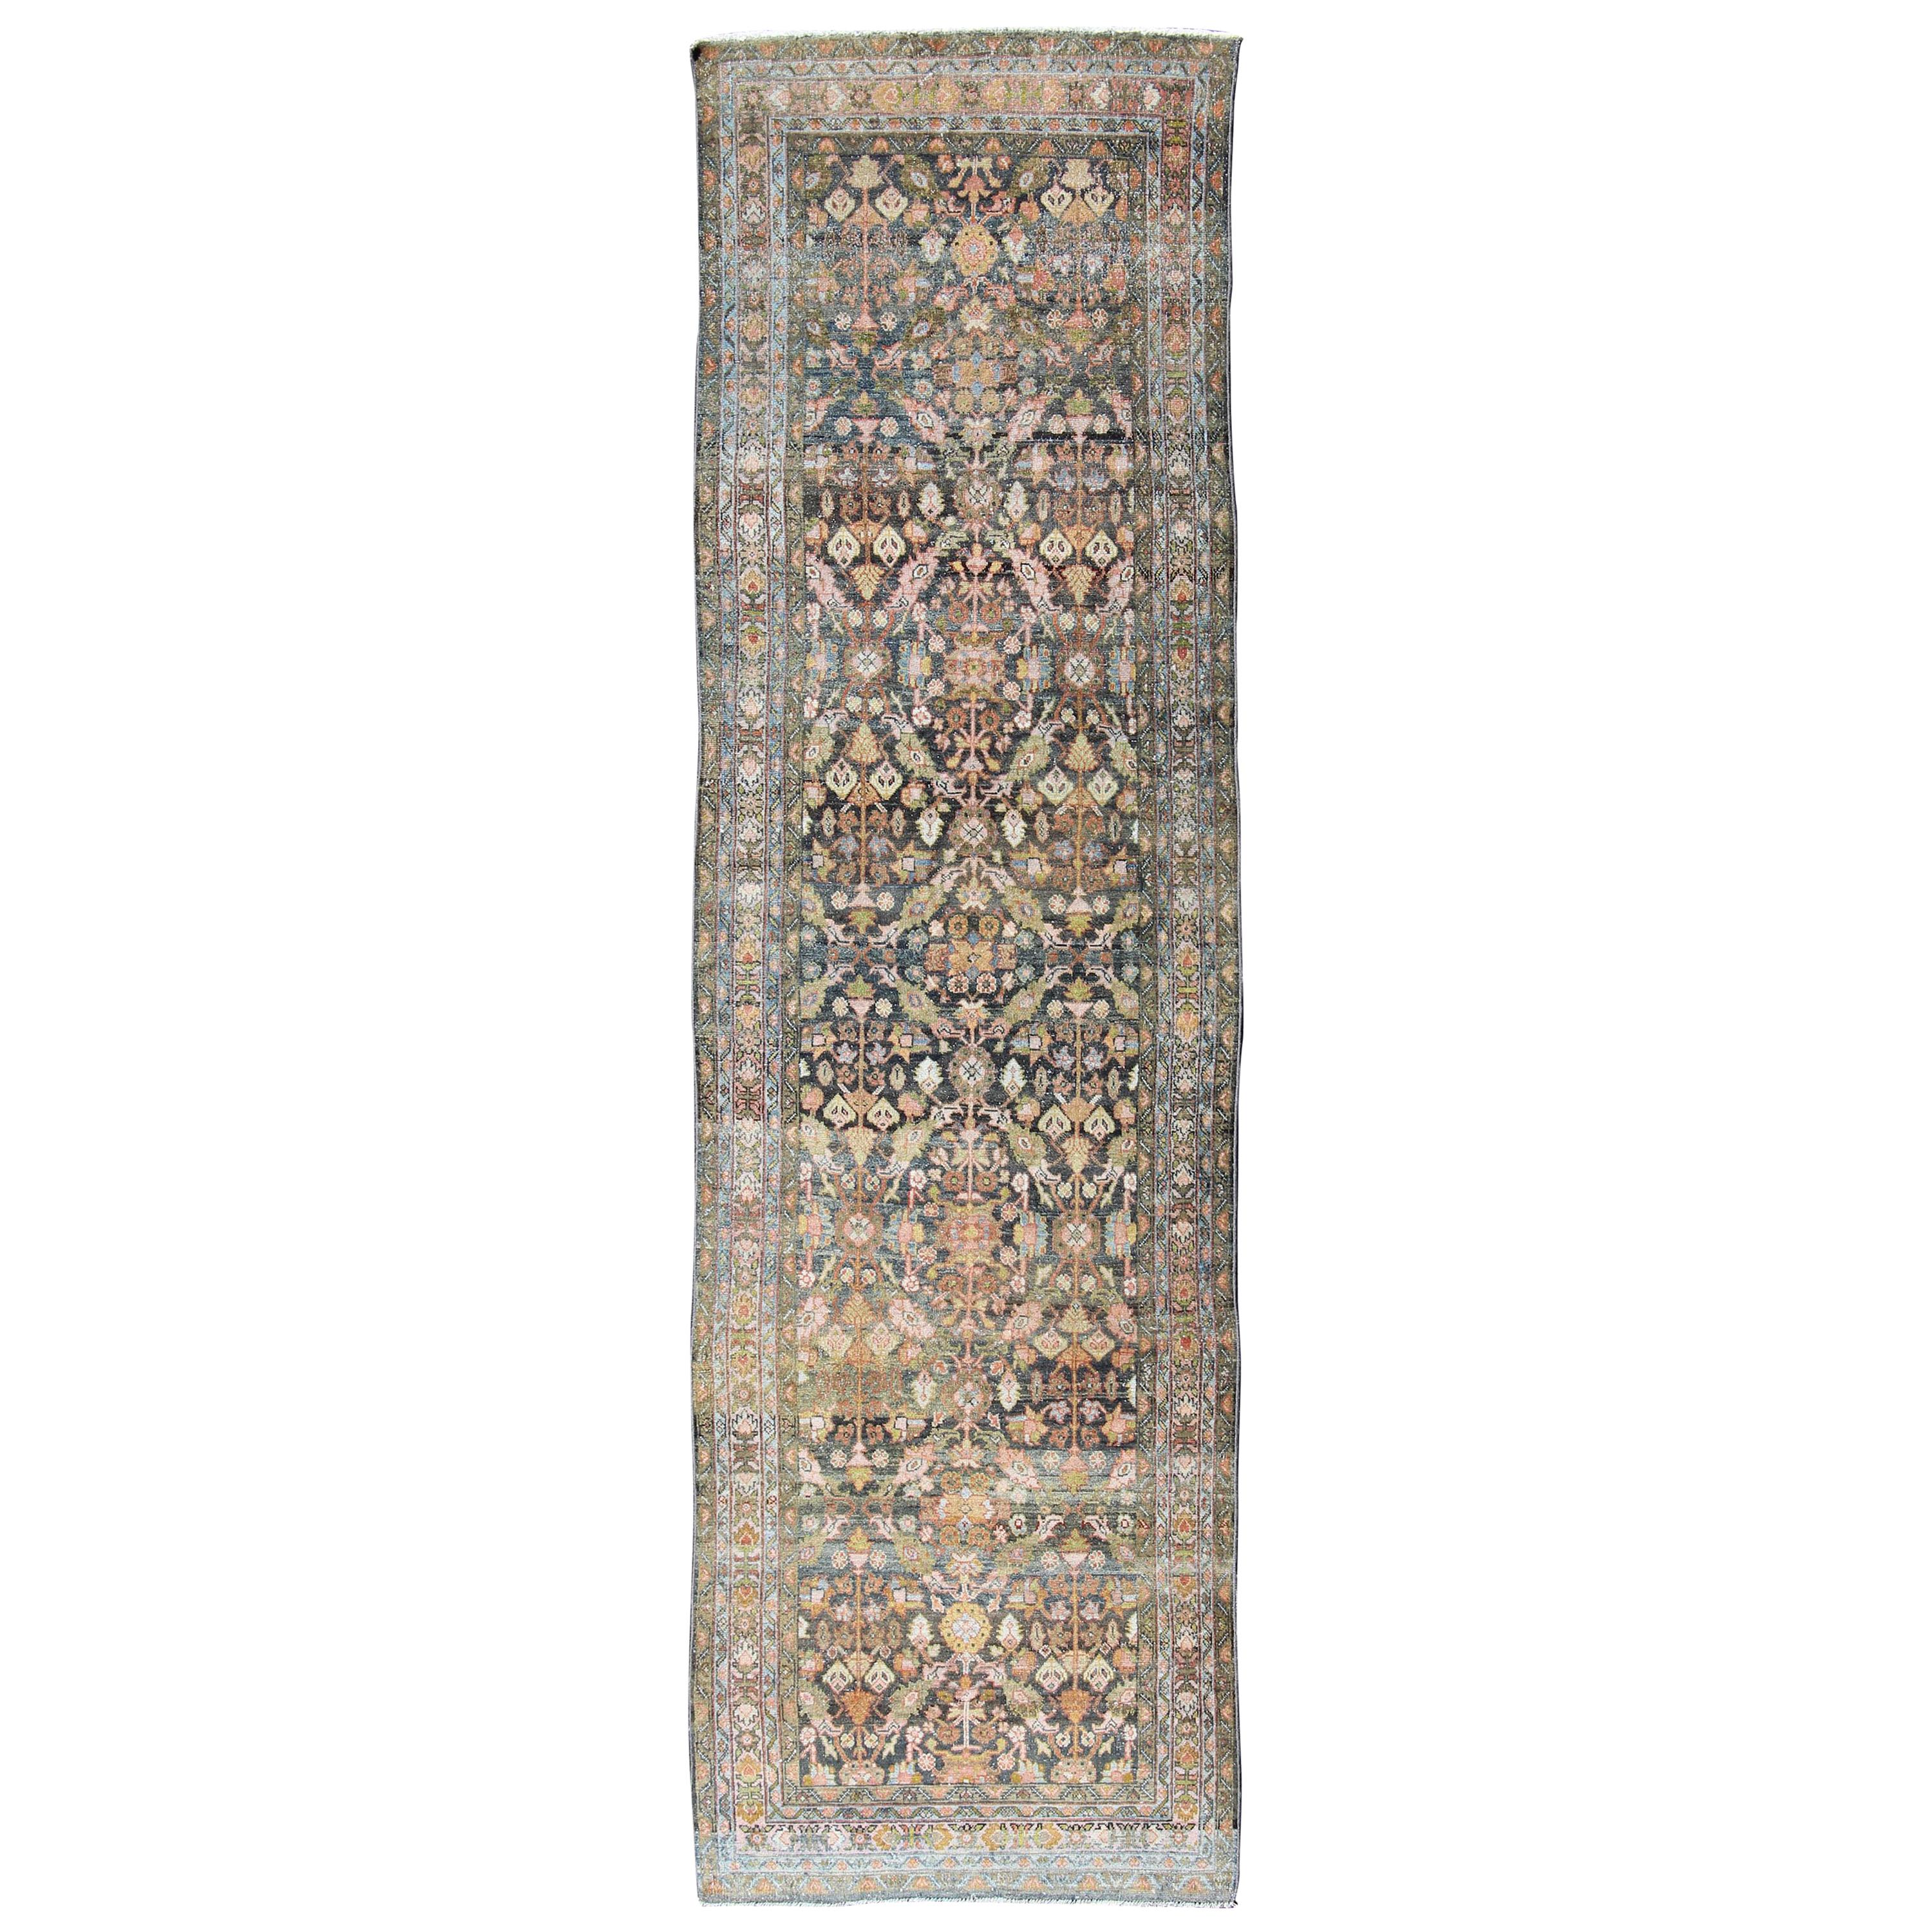 Colorful Antique Persian Hamedan Runner with All-Over Floral Design